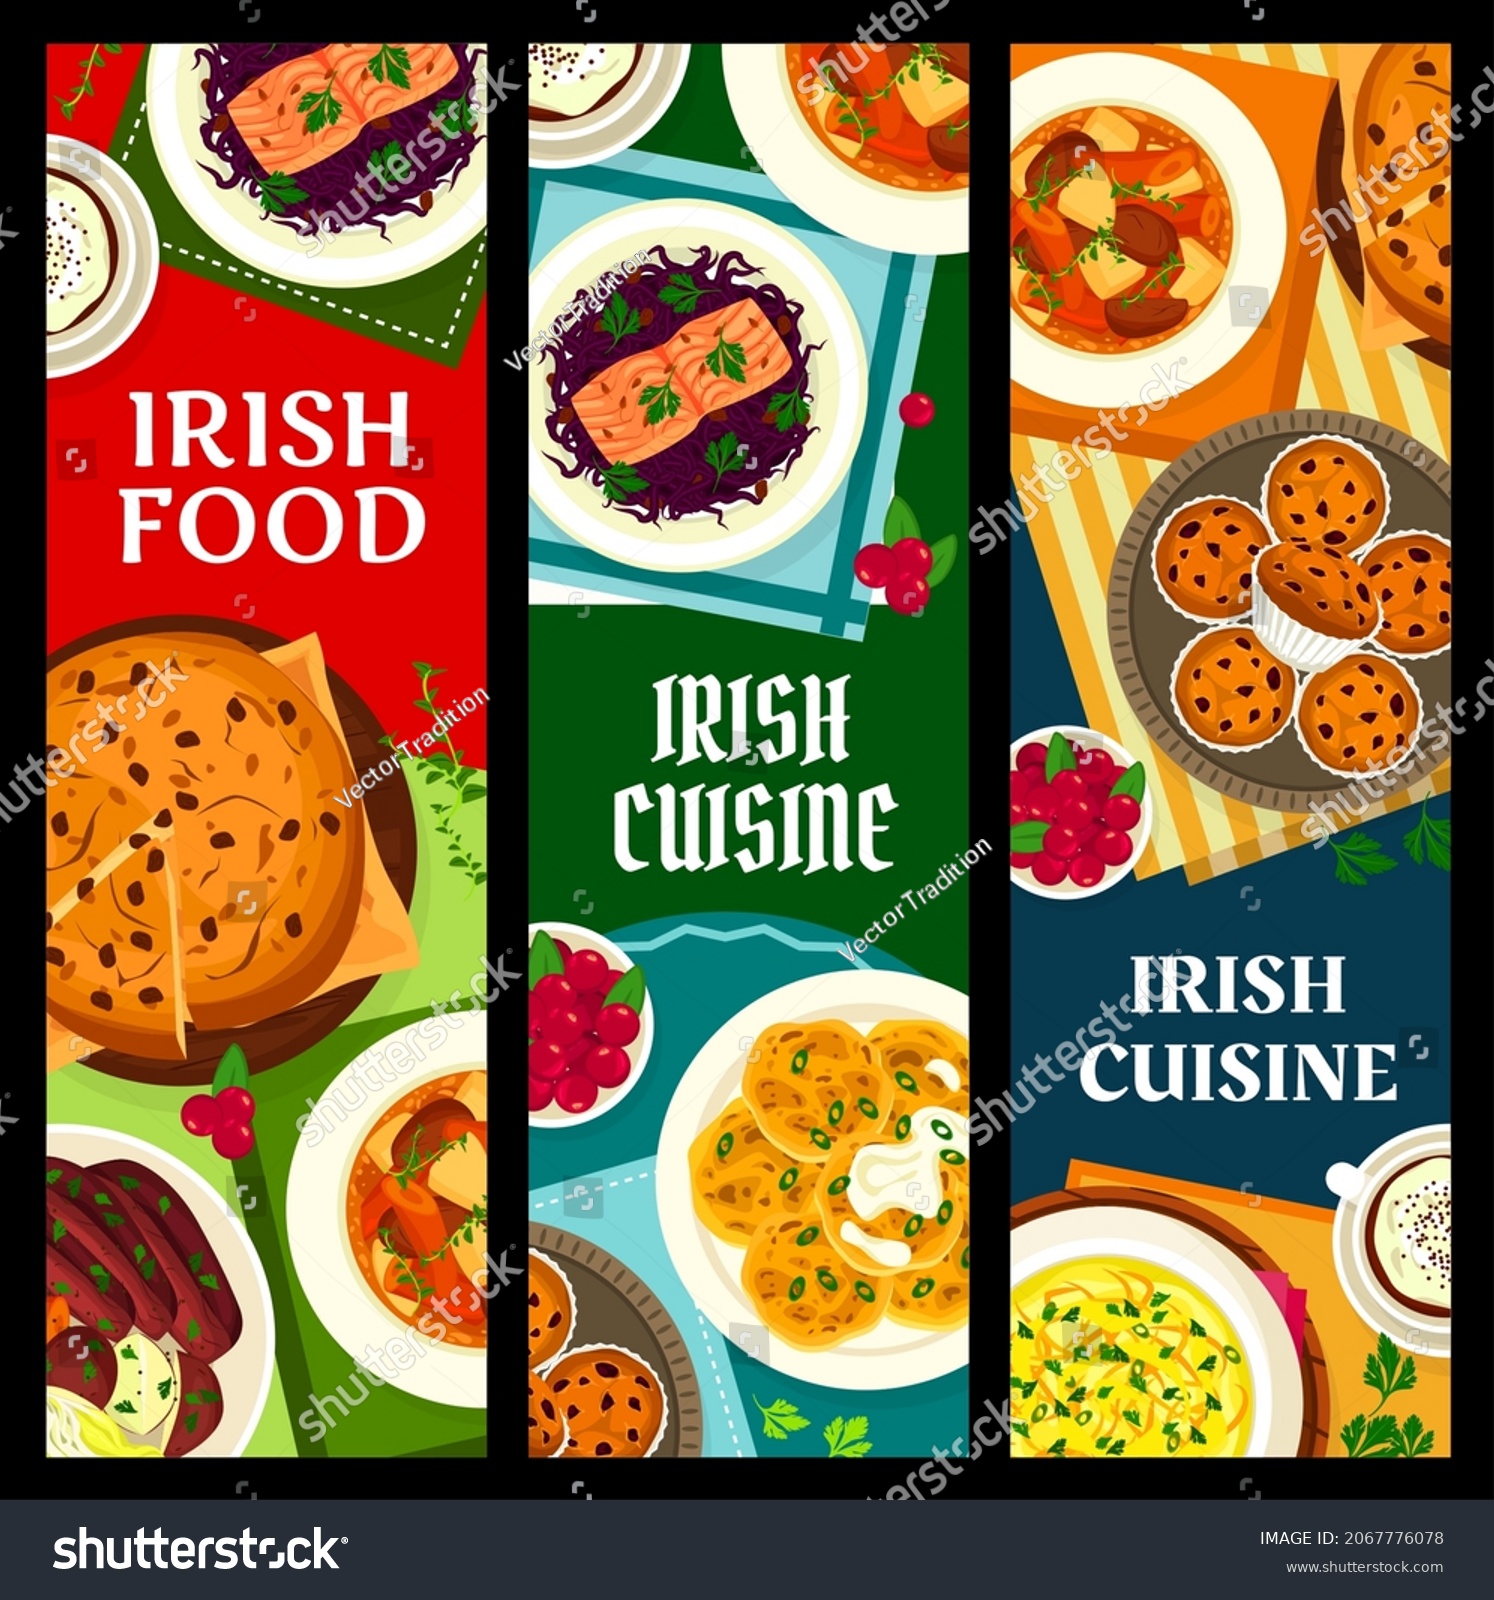 SVG of Irish cuisine vector banners. Red cabbage salad with salmon, potato pancake boxty, fish soup and soda bread with raisins. Coffee, cowberry cupcakes, lamb stew or black pudding with vegetables meals svg